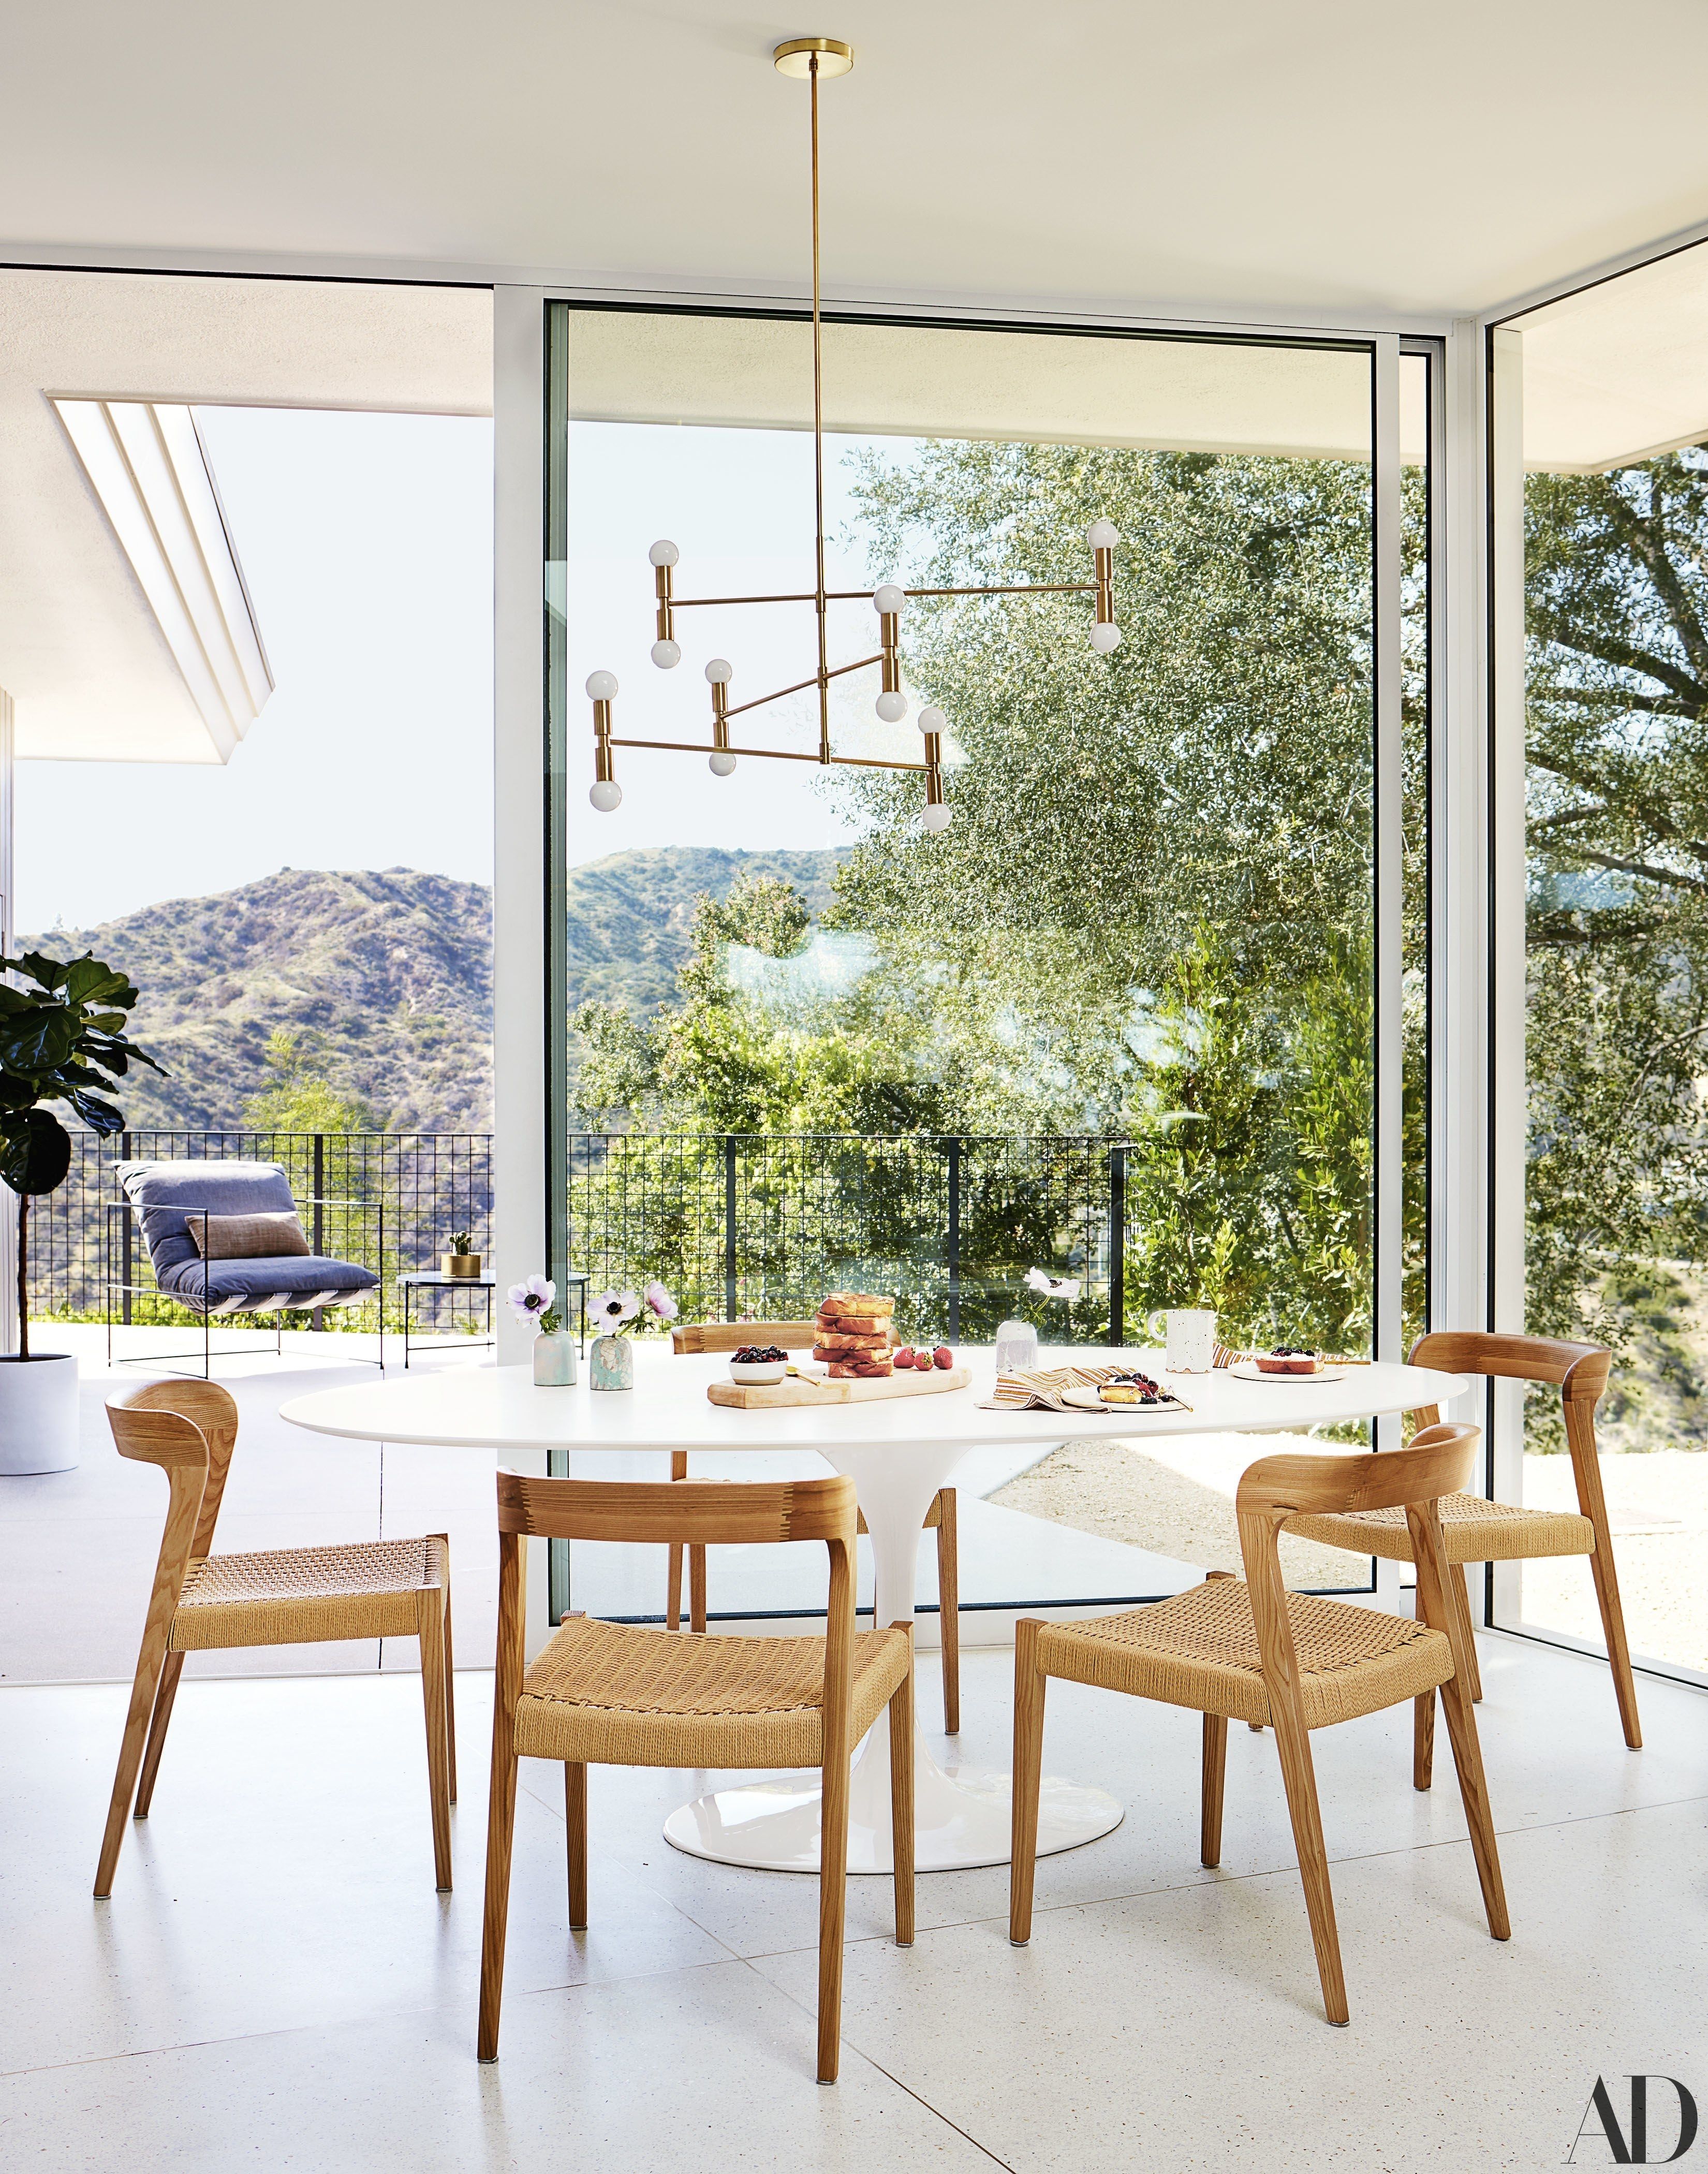 Mandy Paper White Side Chairs In Trendy Inside Mandy Moore's Pasadena Home (View 7 of 20)